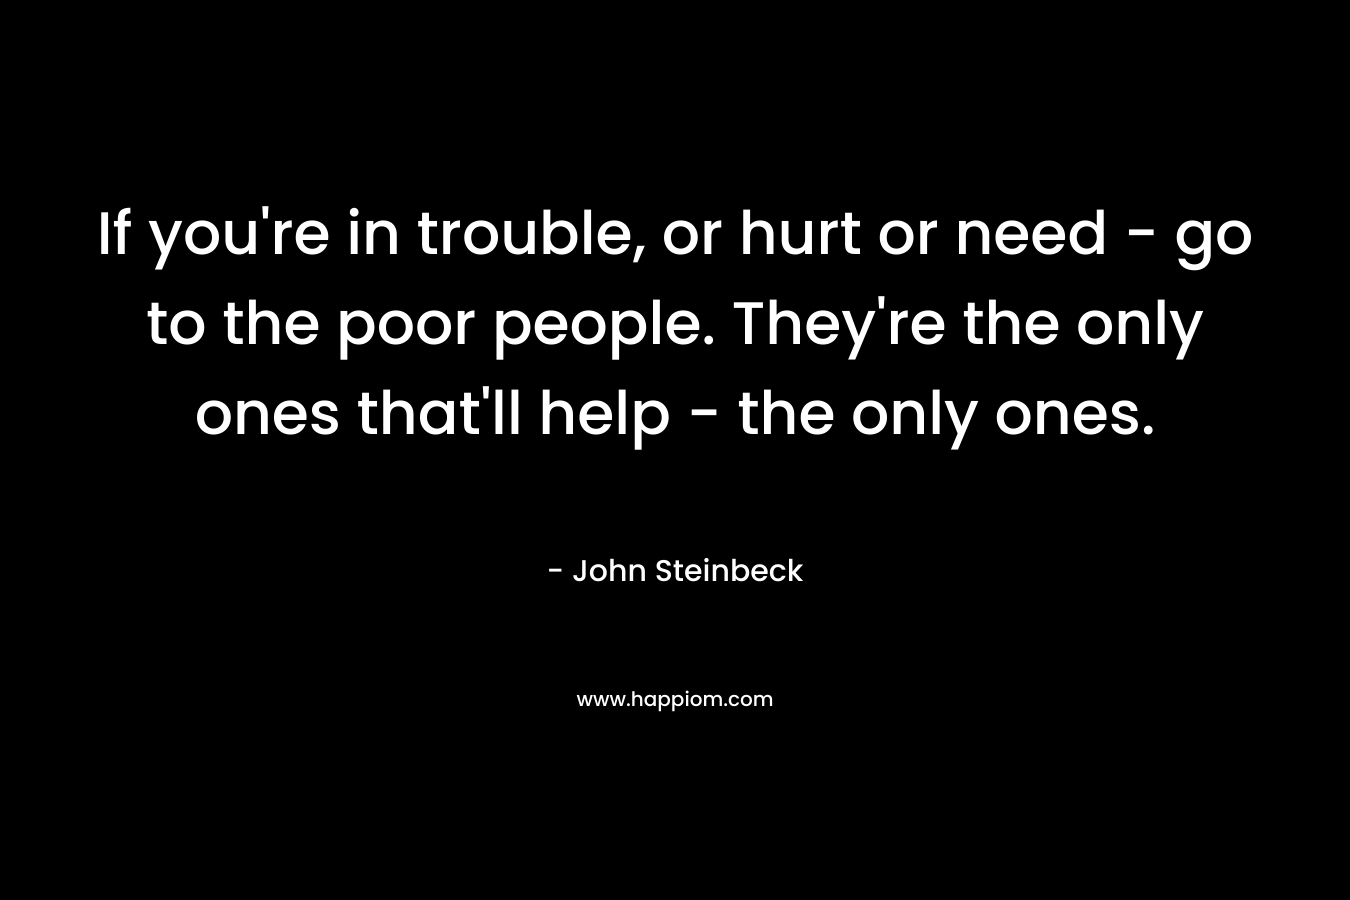 If you’re in trouble, or hurt or need – go to the poor people. They’re the only ones that’ll help – the only ones. – John Steinbeck